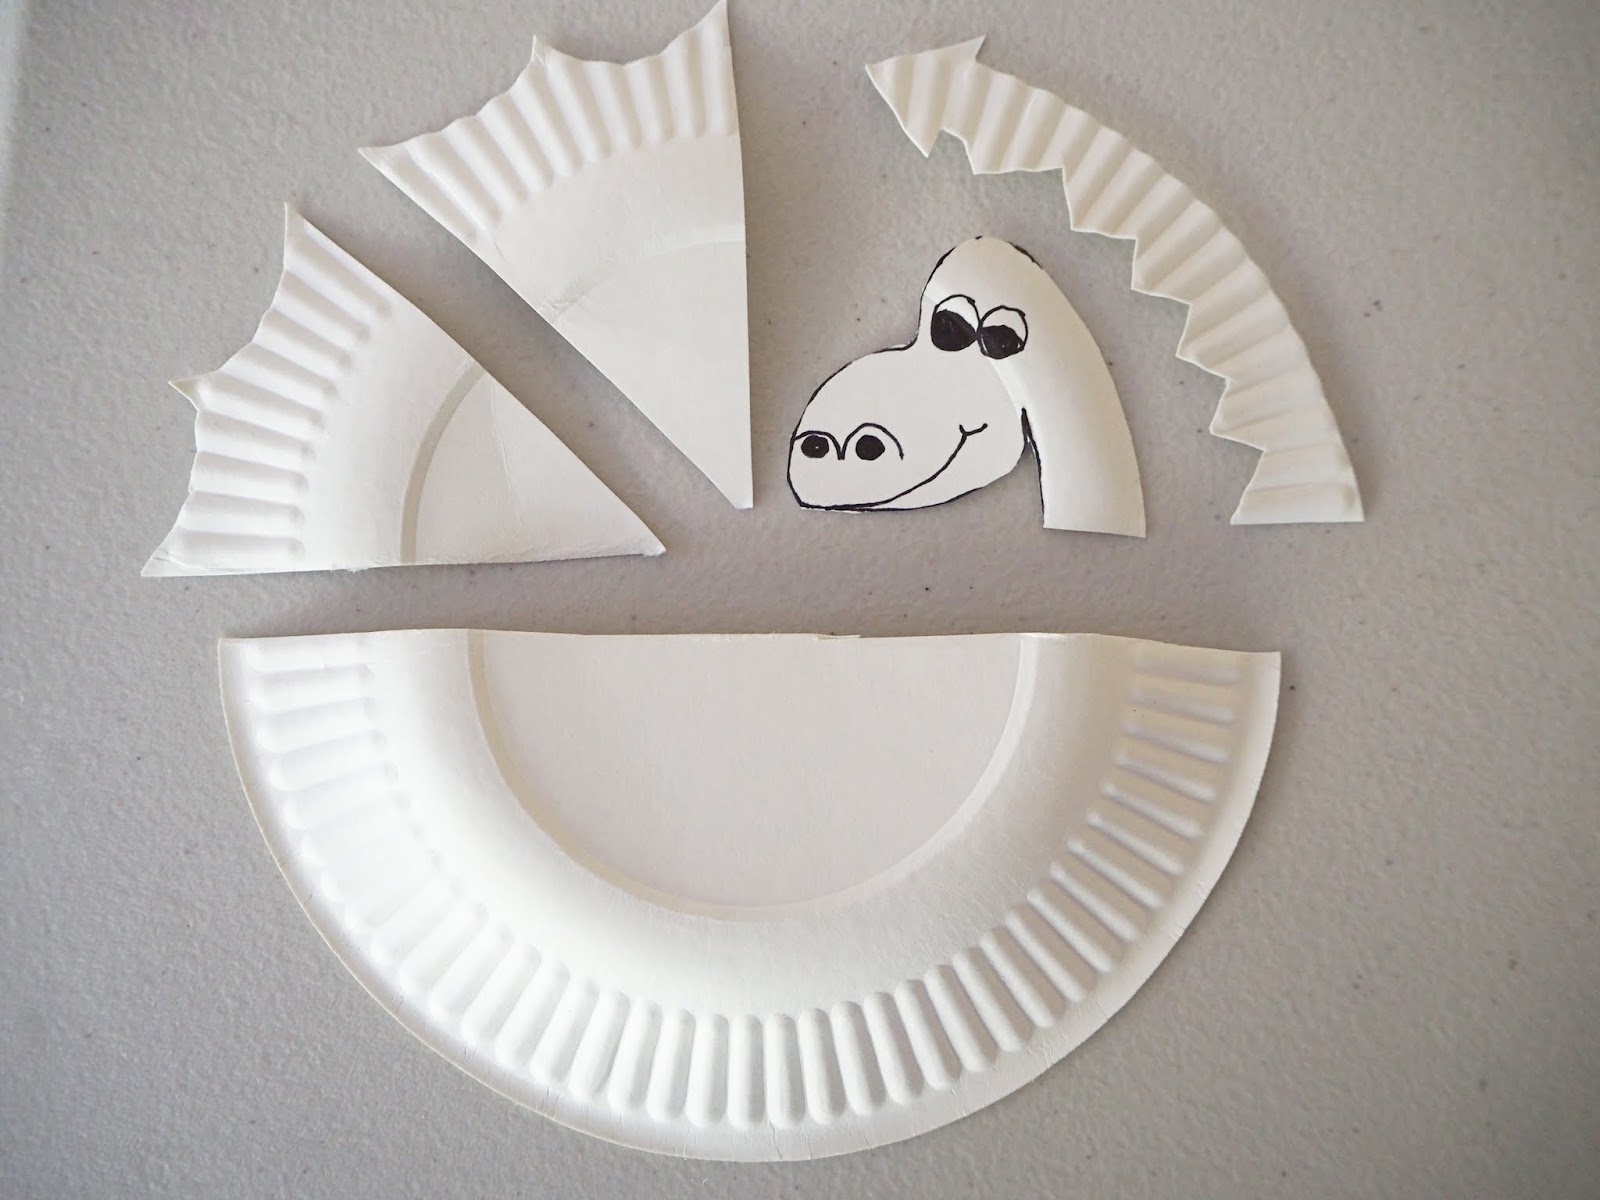 paper-plate-use-crayon-markers-or-paint-to-decorate-your-plate-as-a